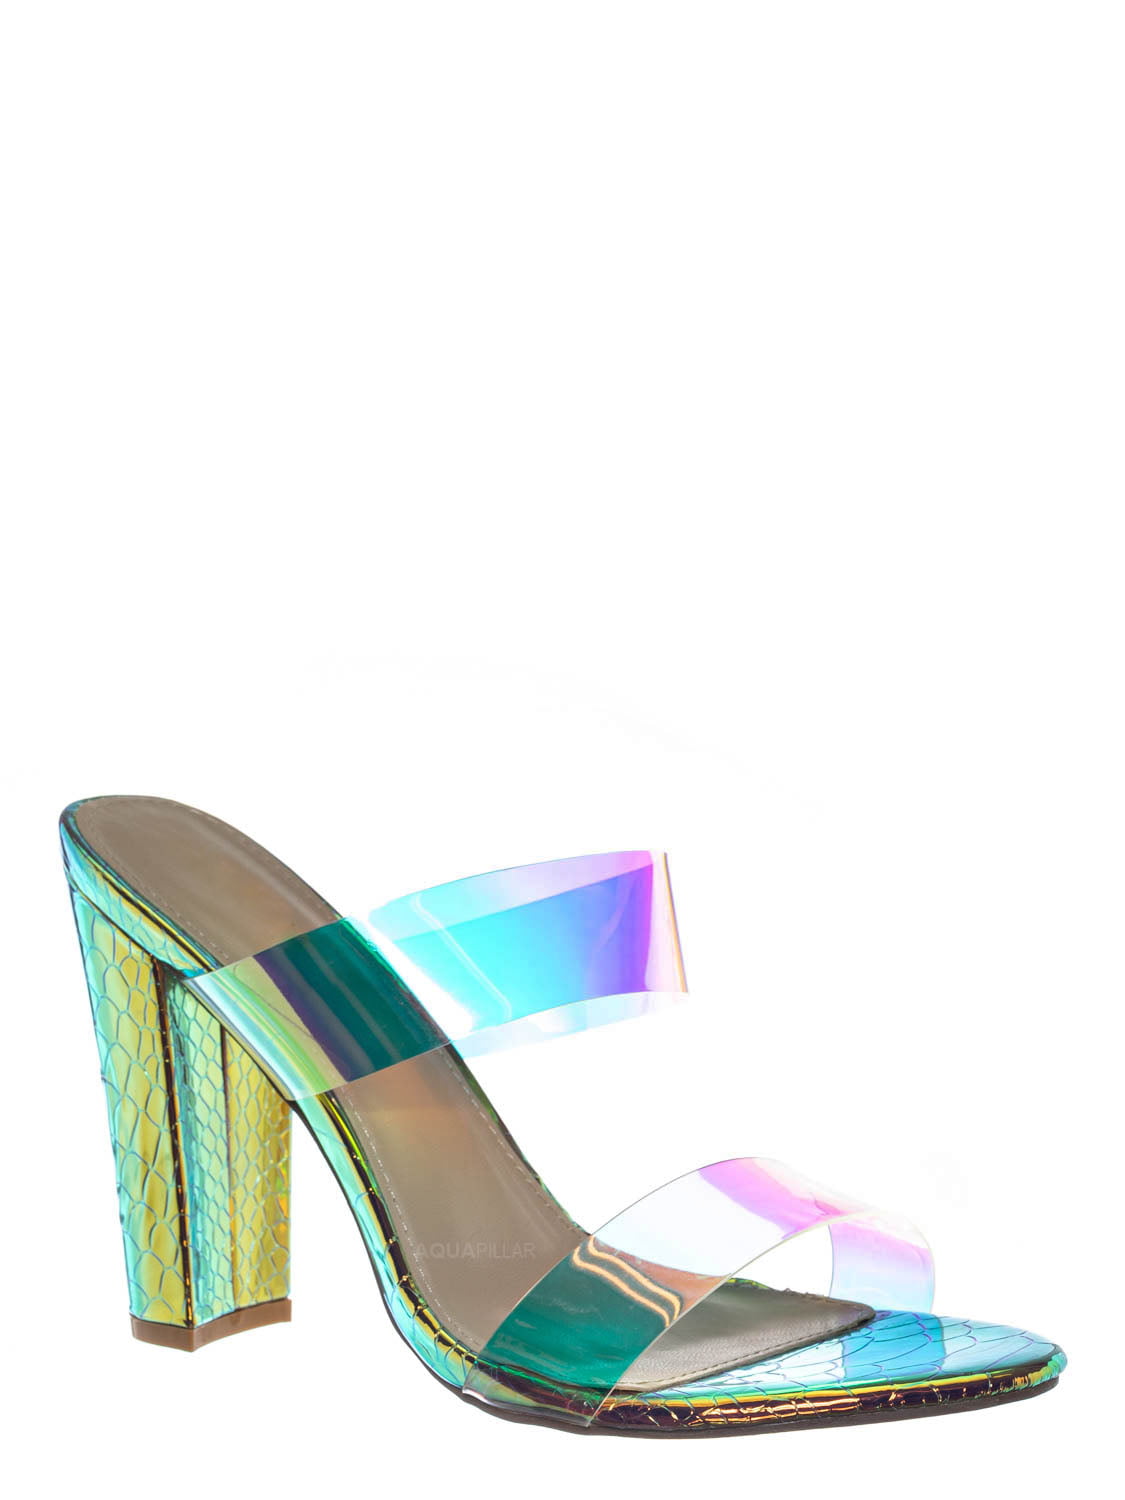 X2B - Iridescent Clear Vinyl Sandal - Chunky High Heel Strappy Lucite ...